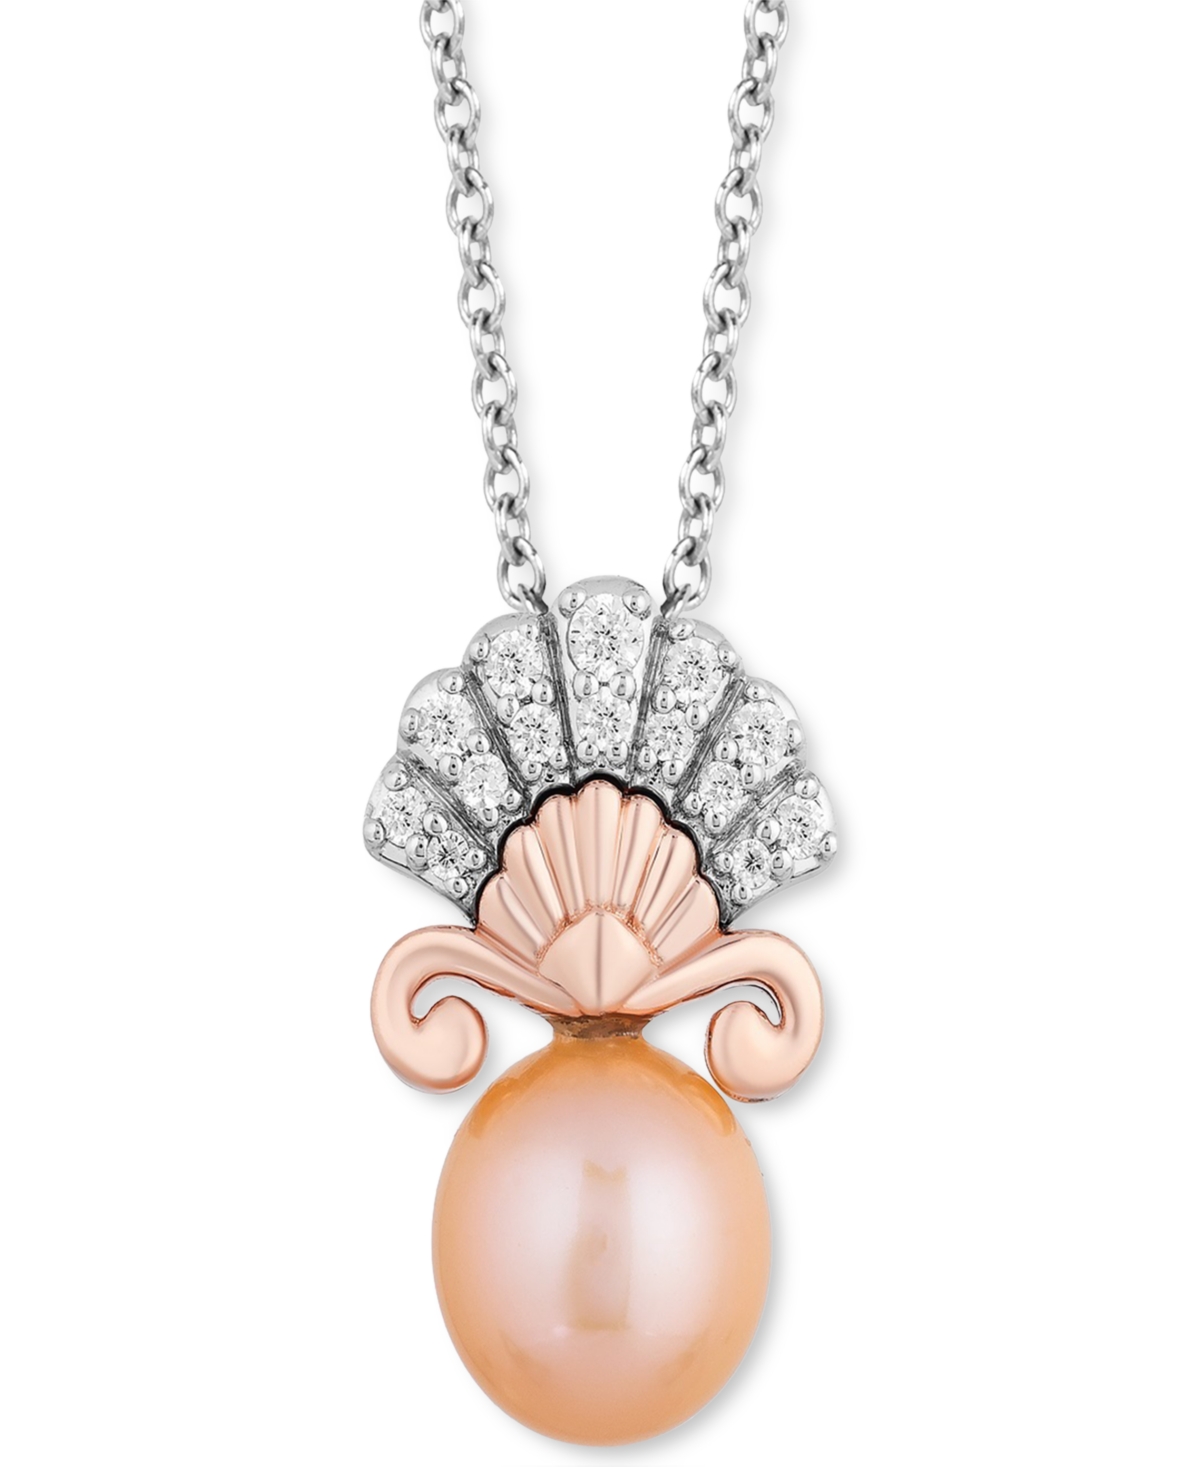 Enchanted Disney Fine Jewelry Pink Cultured Freshwater Pearl (8mm) Diamond (1/7 ct. t.w.) Ariel Shell Pendant Necklace in Sterling Silver & 14k Rose Gold, 16" + 2" extender